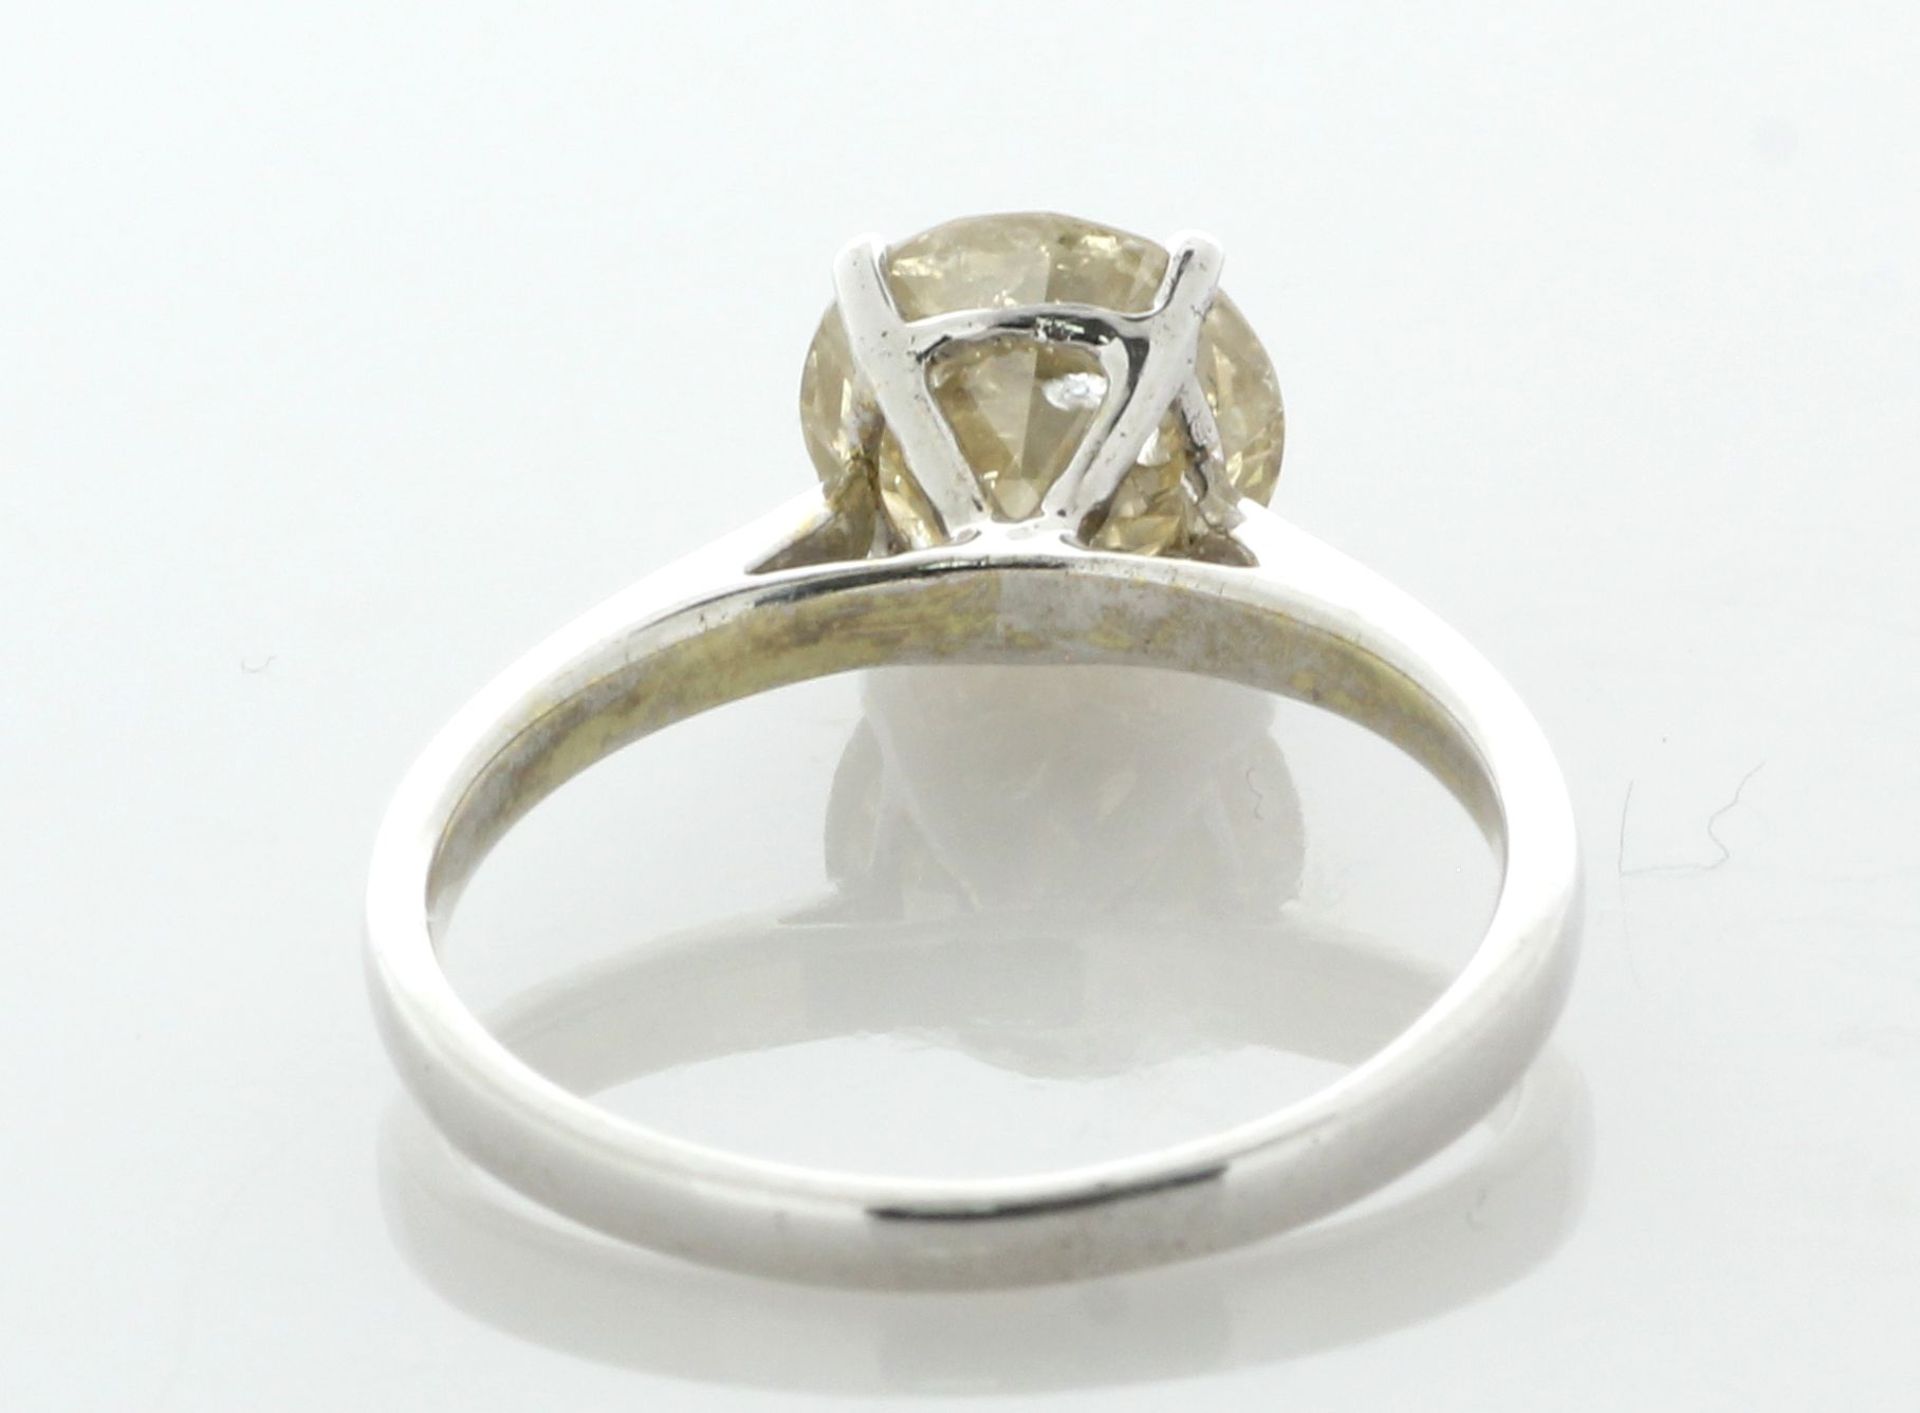 18ct White Gold Single Stone Diamond Ring 1.78 Carats - Valued By AGI £7,200.00 - One natural - Image 3 of 4